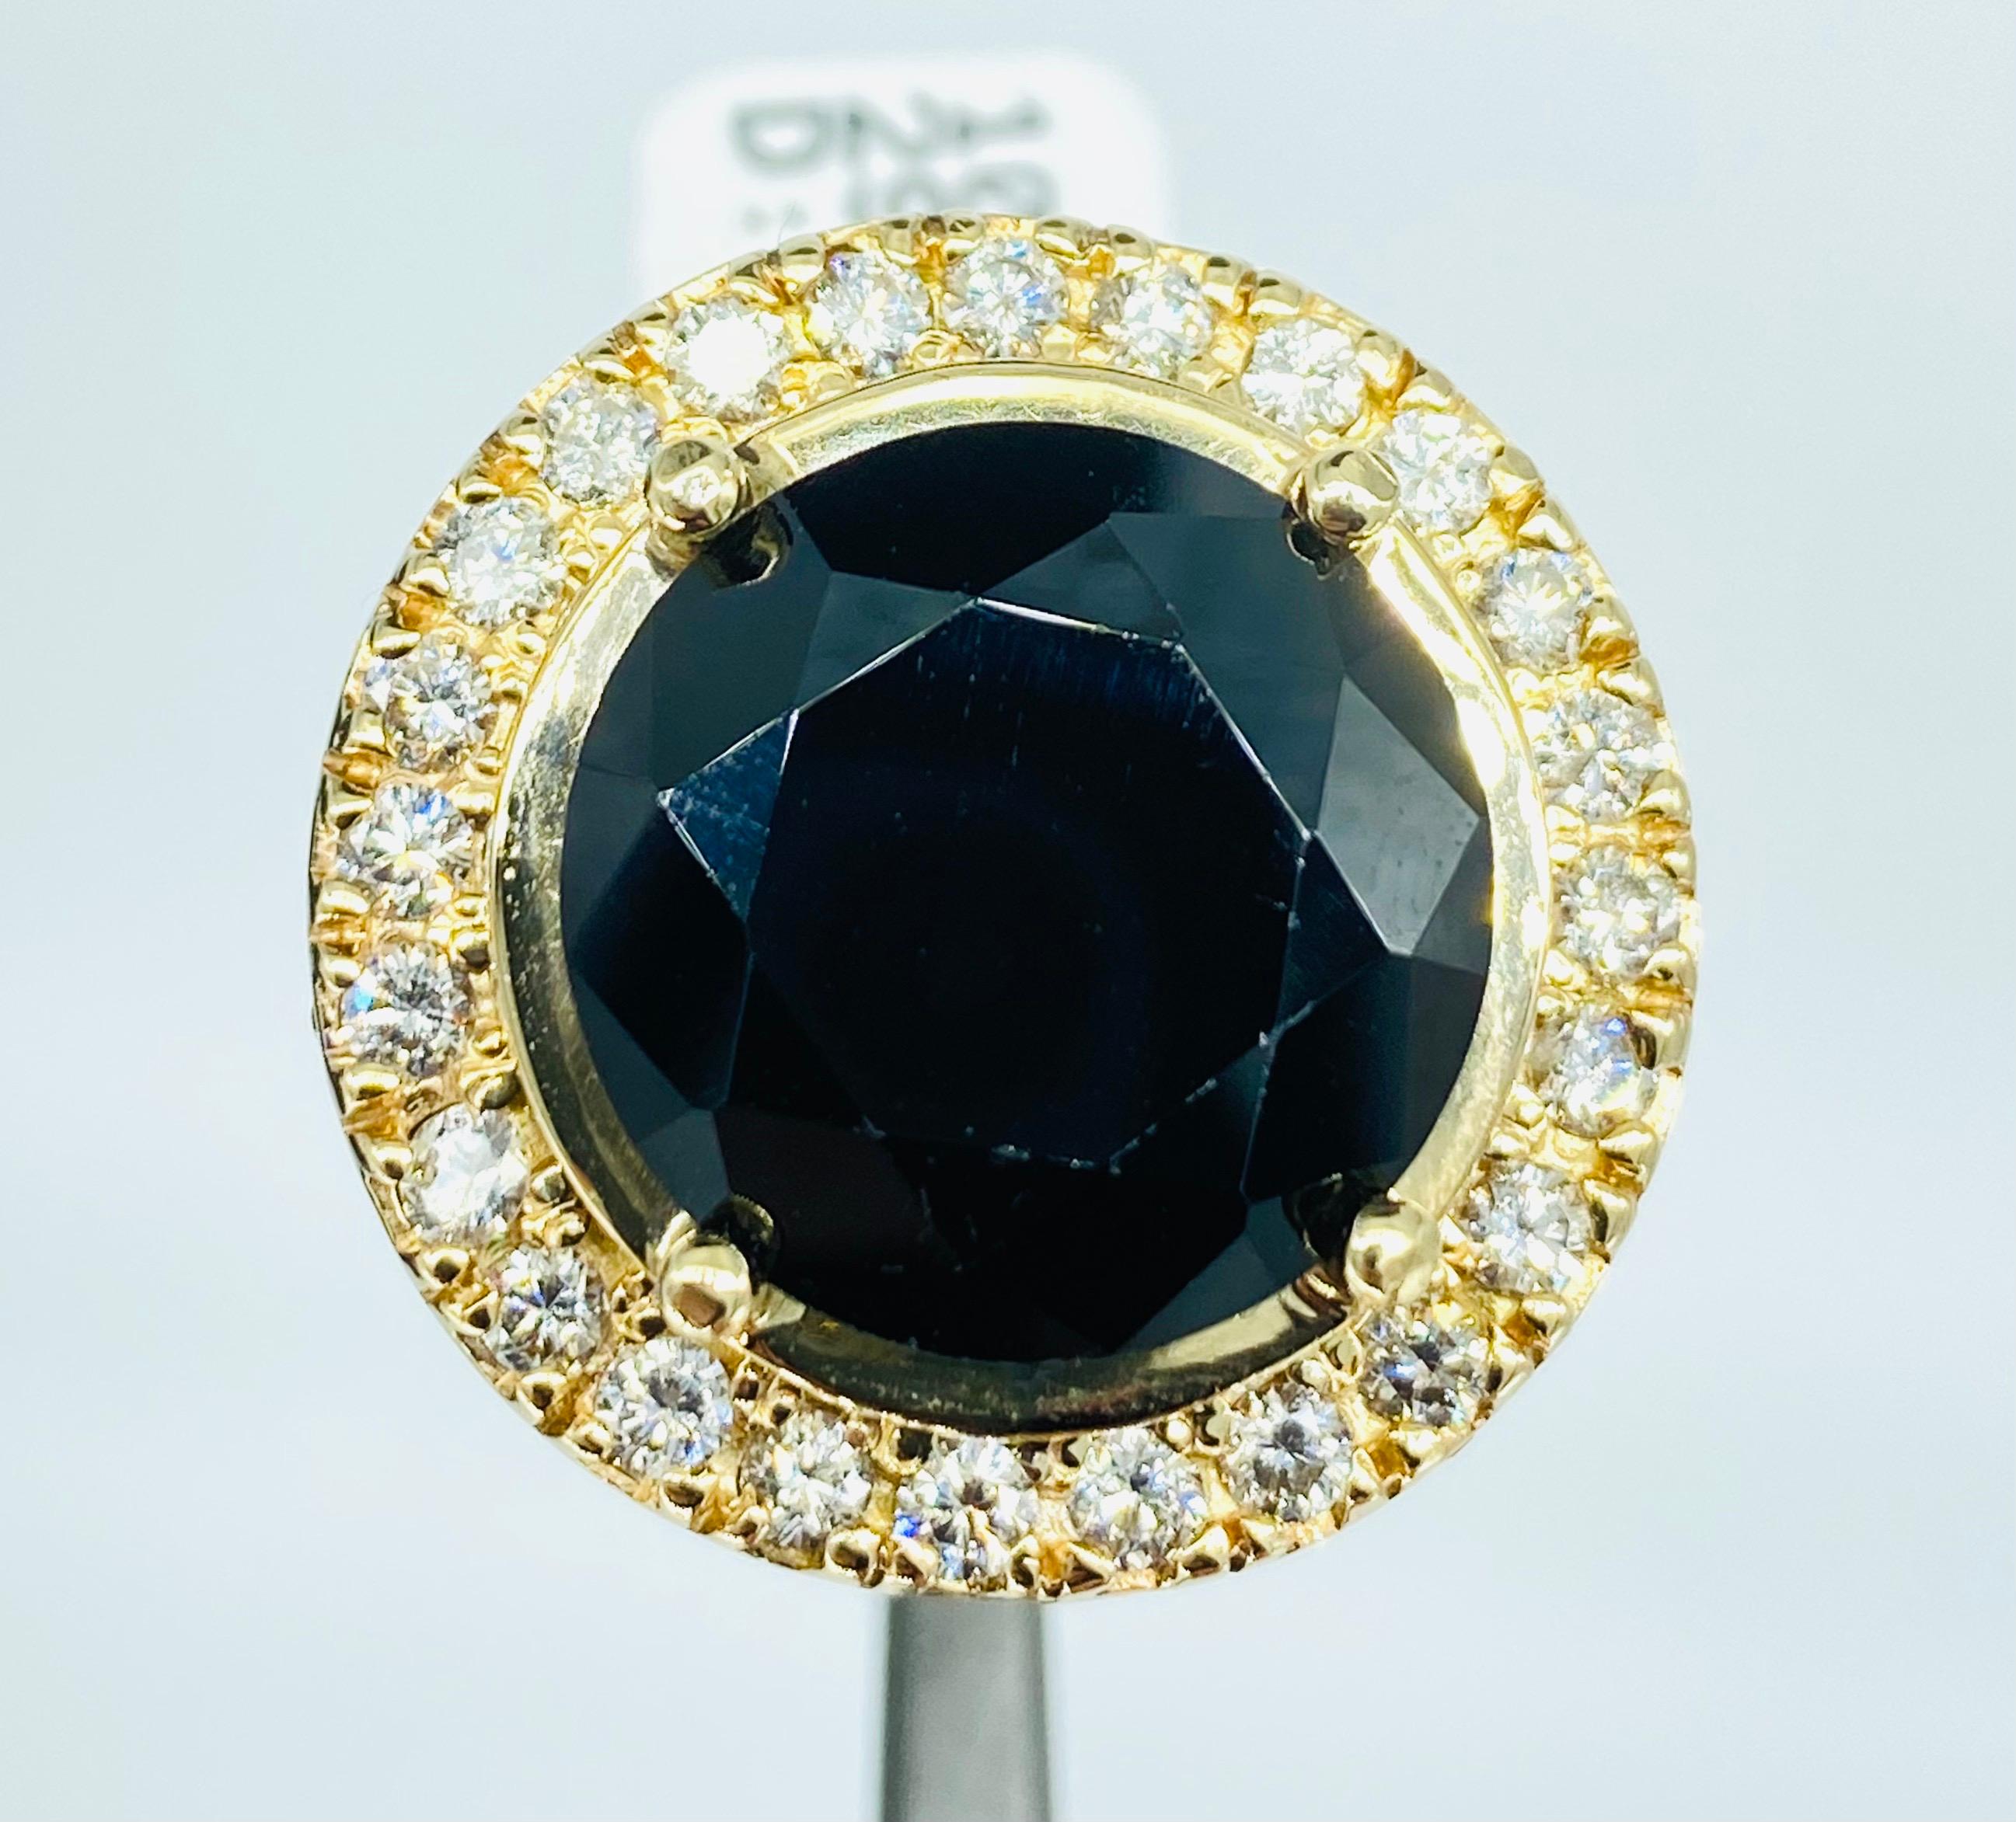 Men’s 16.25mm Black Onyx 4.00 Carat Diamonds BIG Statement Ring. 
The ring measures 25.8mm and is a size 12.5.
The ring is very big and features approx 4.00 carat of diamonds. 